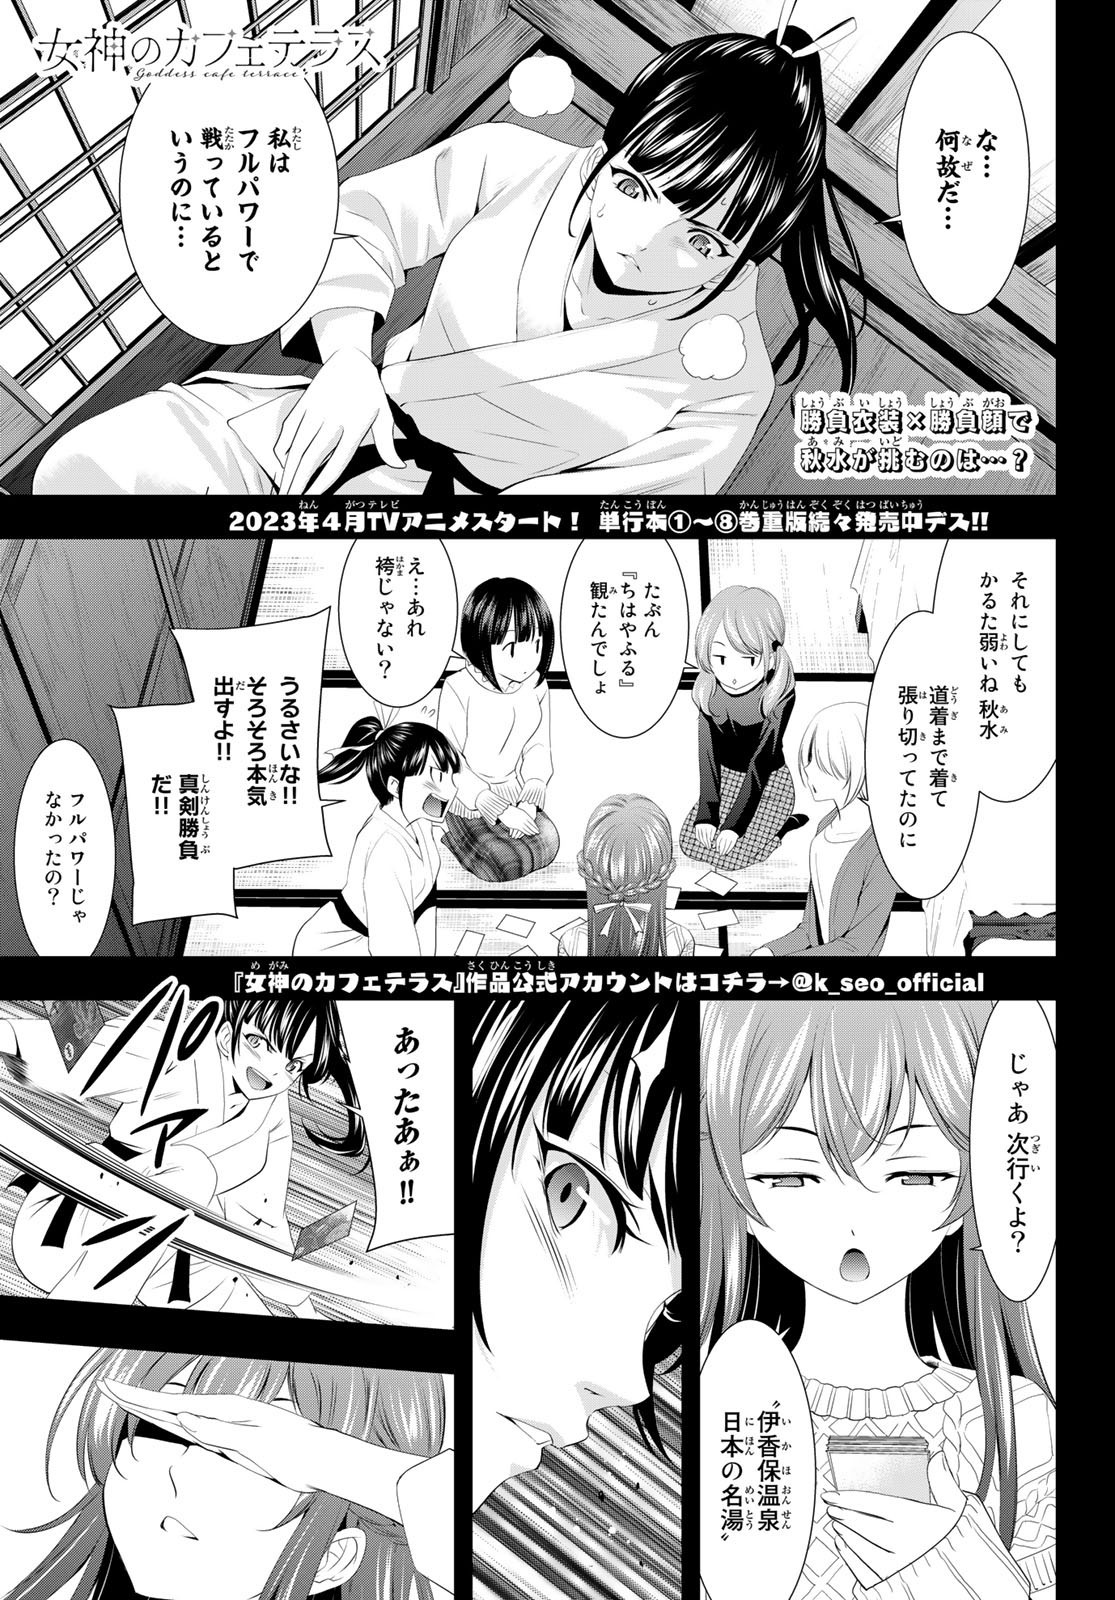 Goddess-Cafe-Terrace - Chapter 086 - Page 1